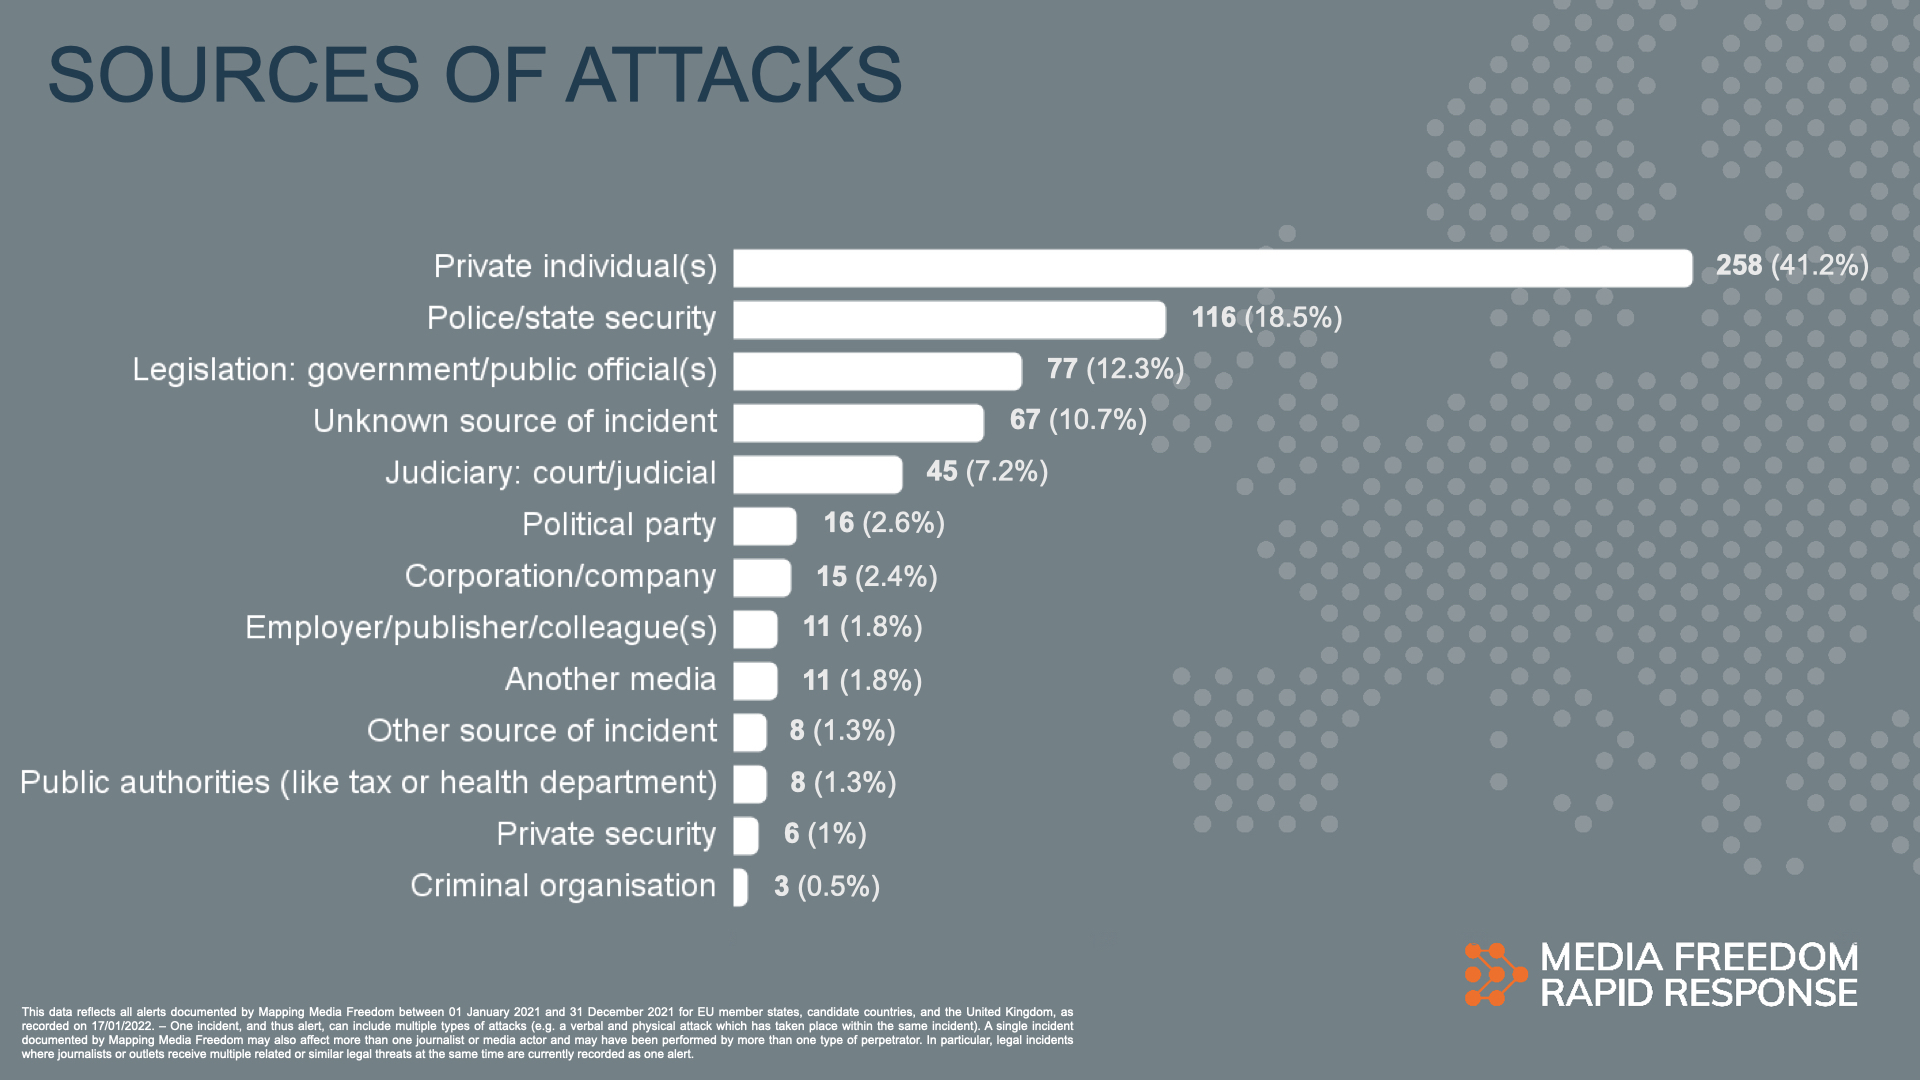 As was the case in previous reports, private individuals remain the main perpetrators of attacks, with 41.2% of all violations. This is followed by police or state security (18.5%), legislation i.e. government/public officials (12.3%), unknown sources (10.7%), and the judiciary i.e. from a court (7.2%). A full break down of all other sources of violations can be found in the infographic below.